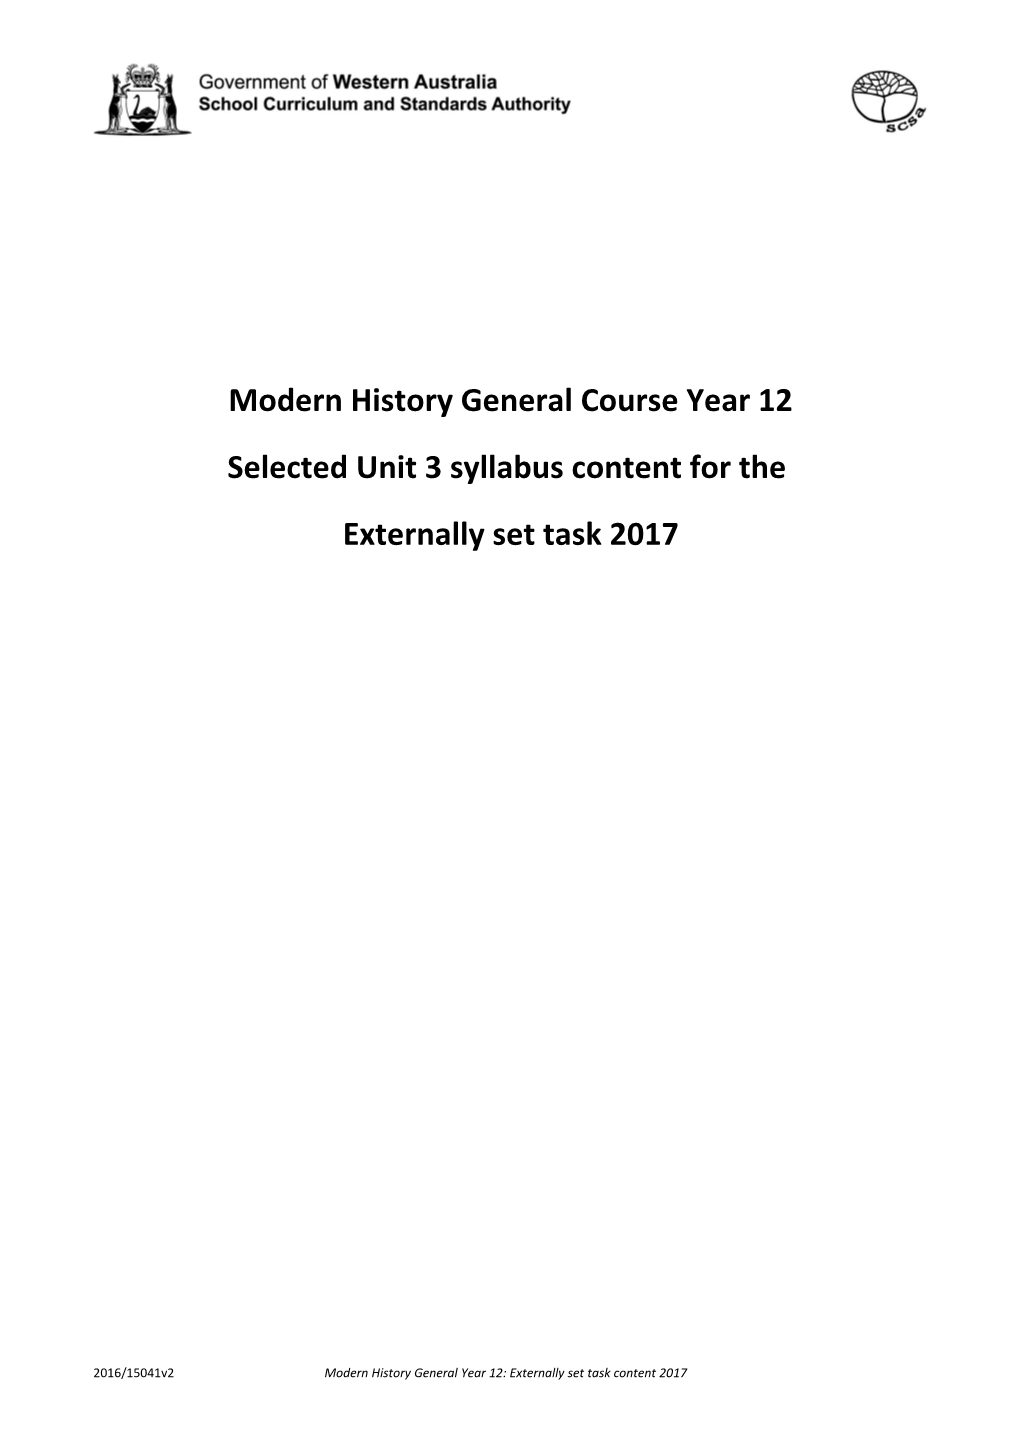 Modern History General Course Year 12